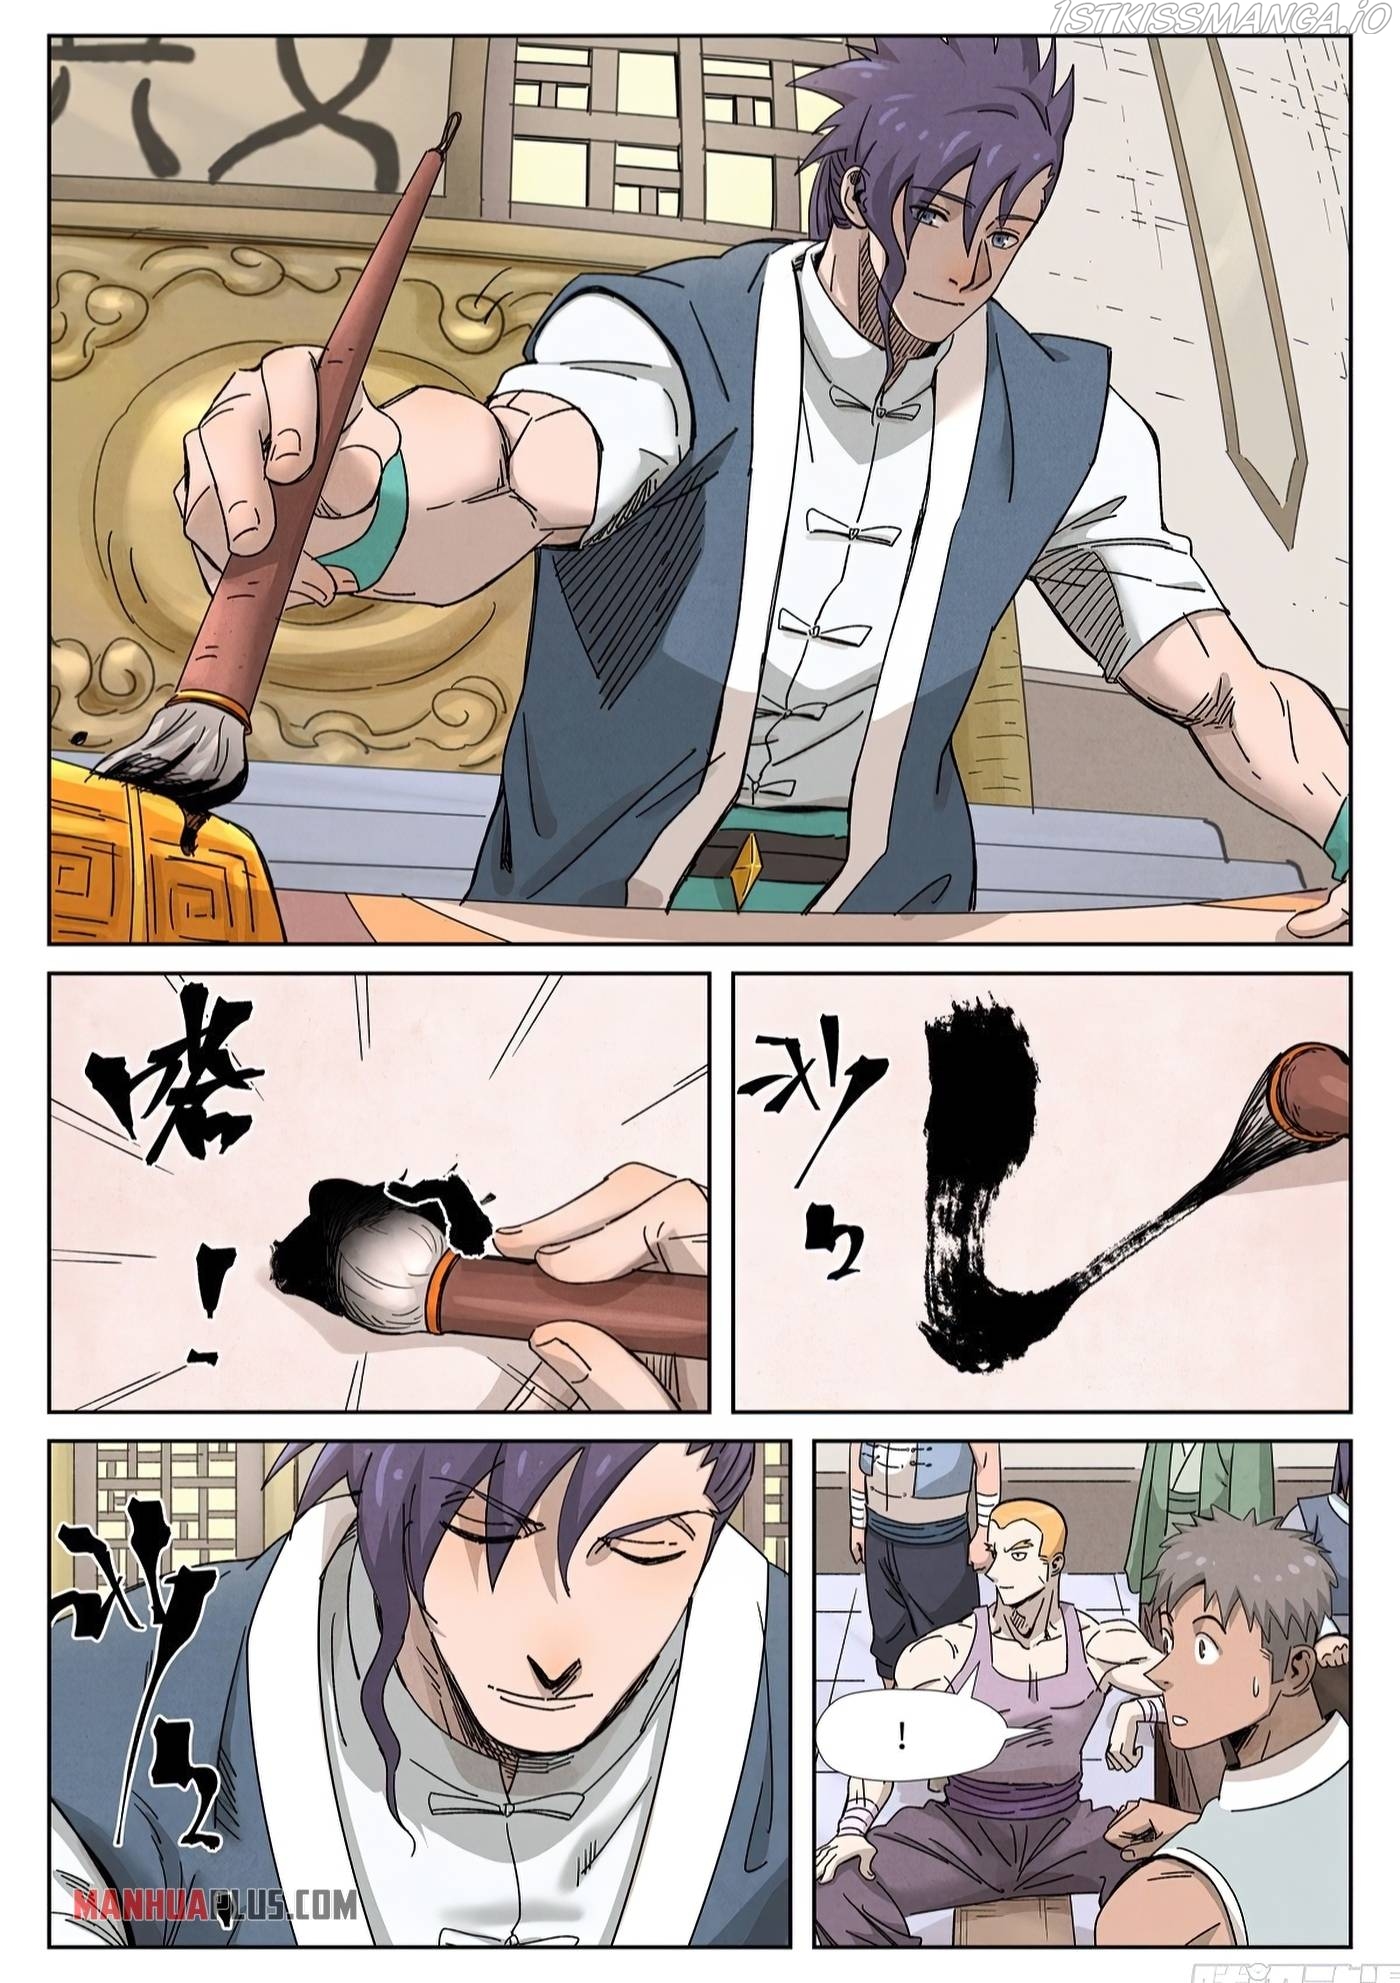 Tales of Demons and Gods Manhua Chapter 339.6 - Page 5